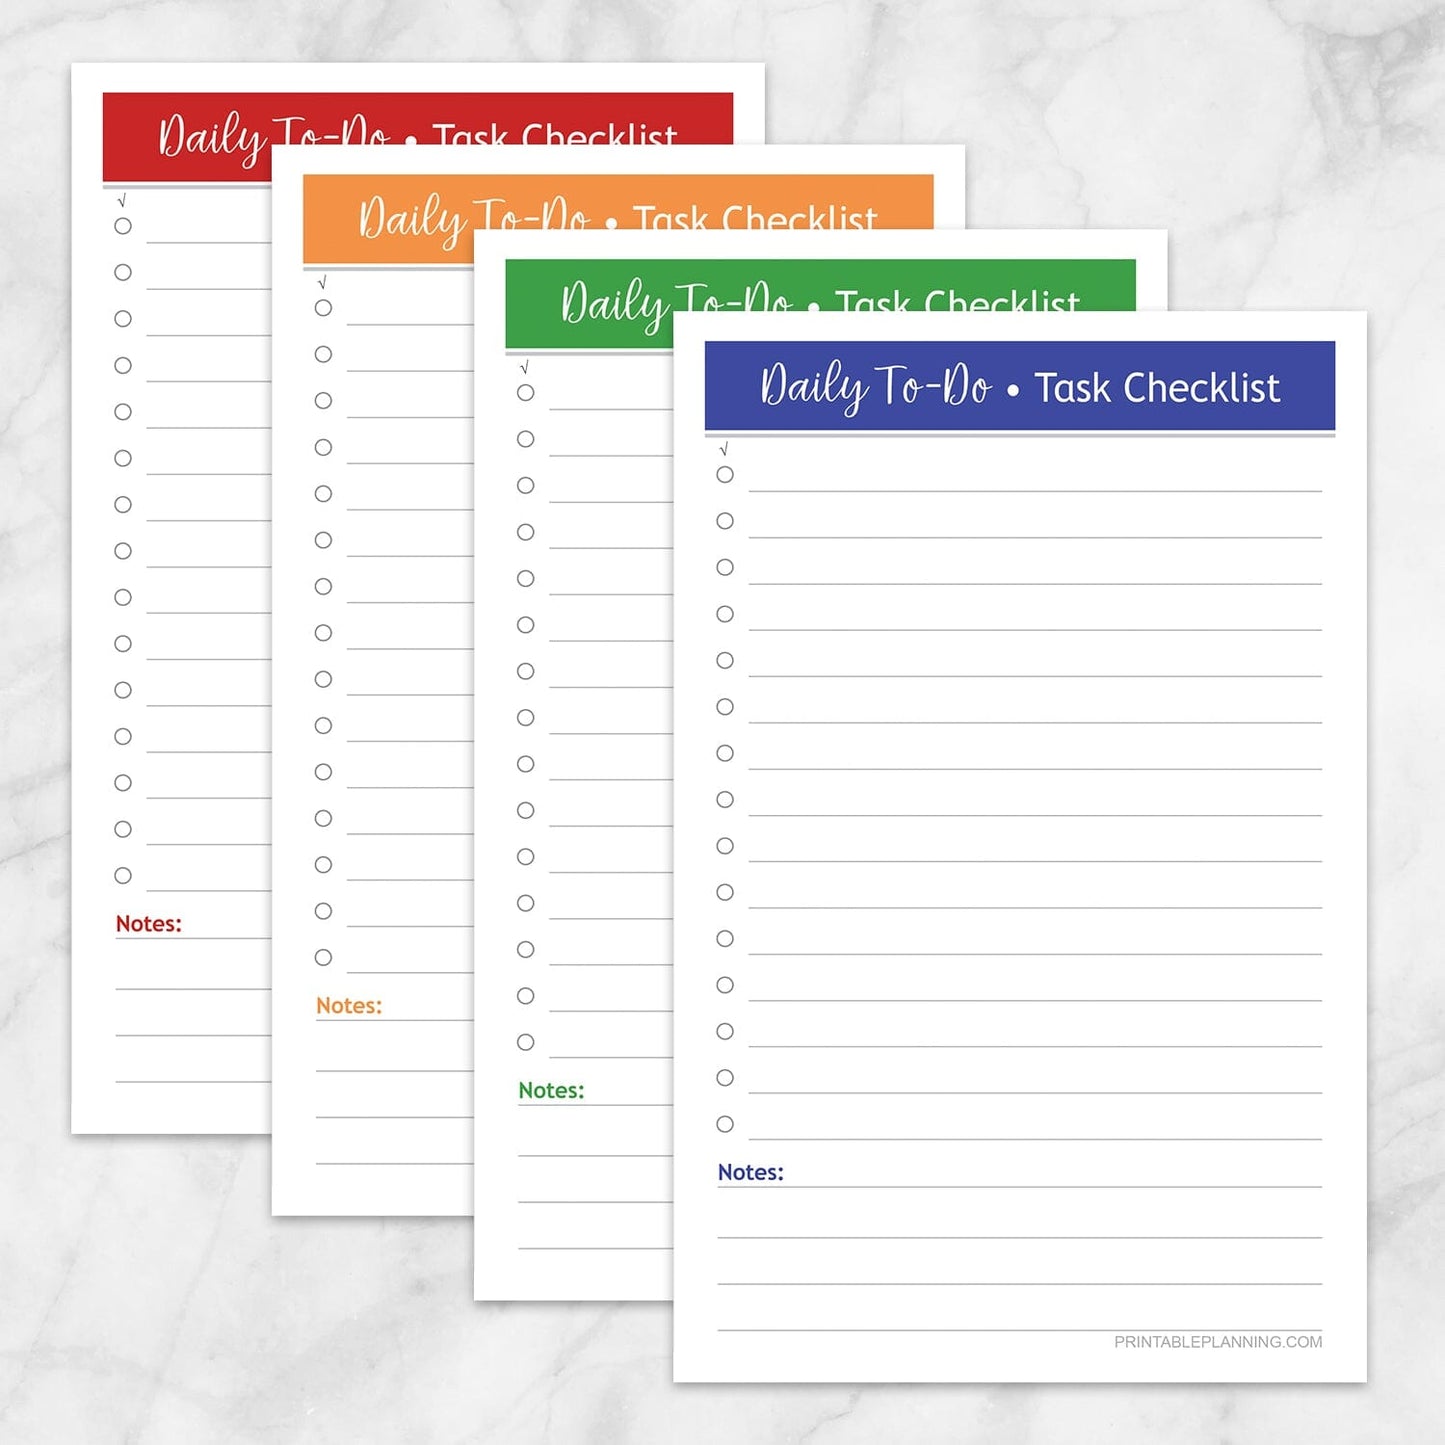 Printable Daily To-Do Lists - 2 Per Page - Task Checklists BUNDLE in 4 Bold Colors at Printable Planning.